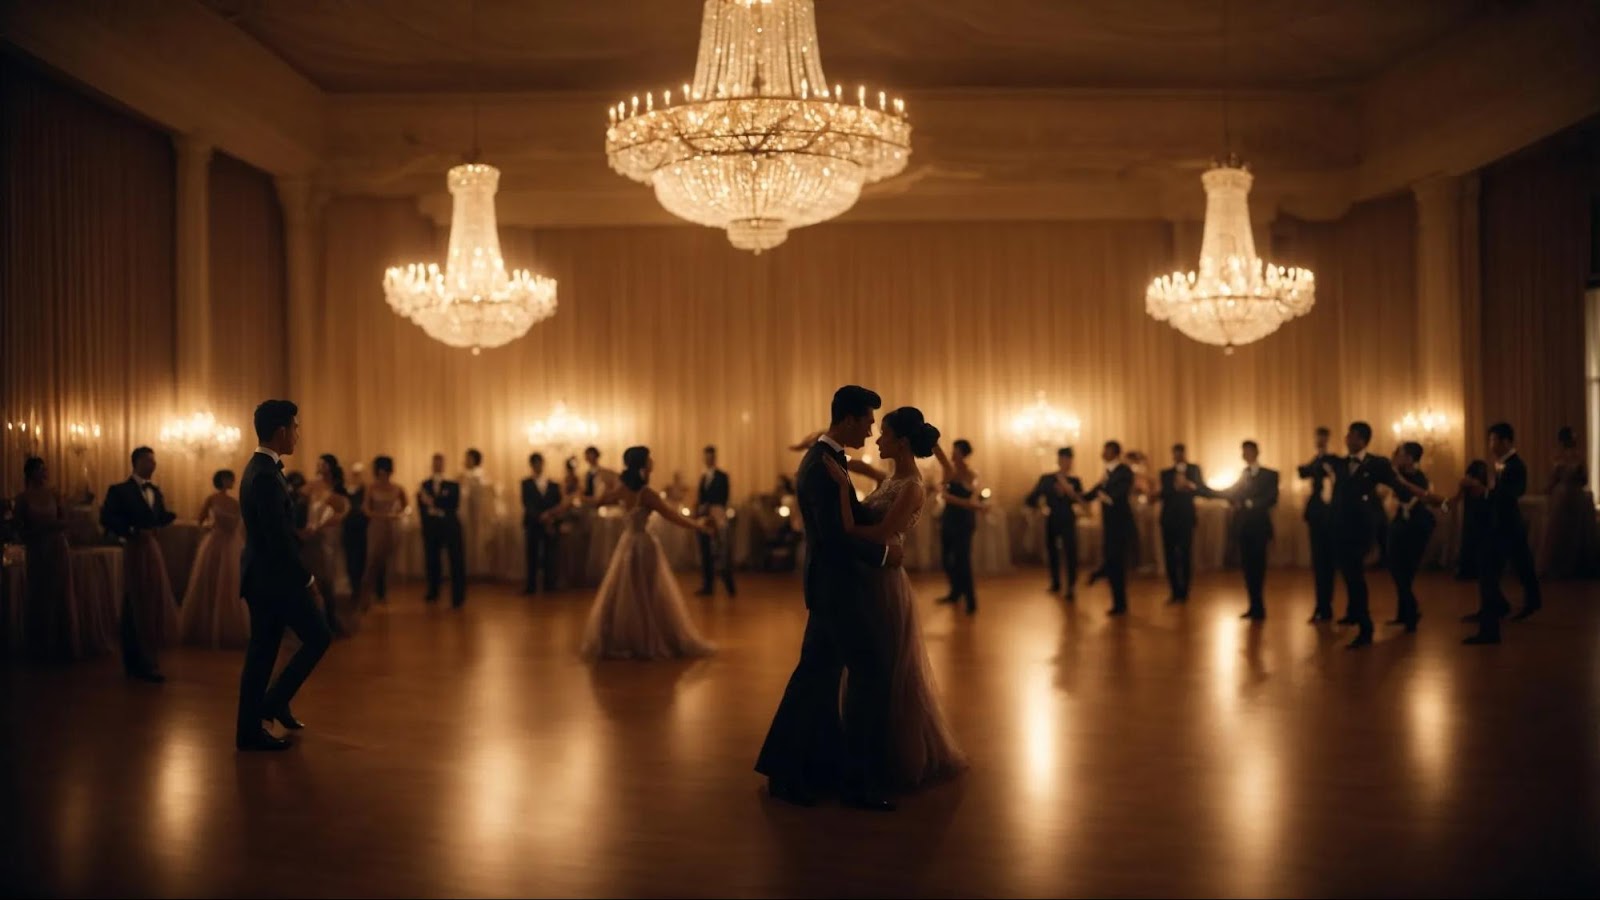 a dimly lit ballroom with pairs of dancers, each immersed in their dance, gracefully moving across the floor under a soft, glowing chandelier.